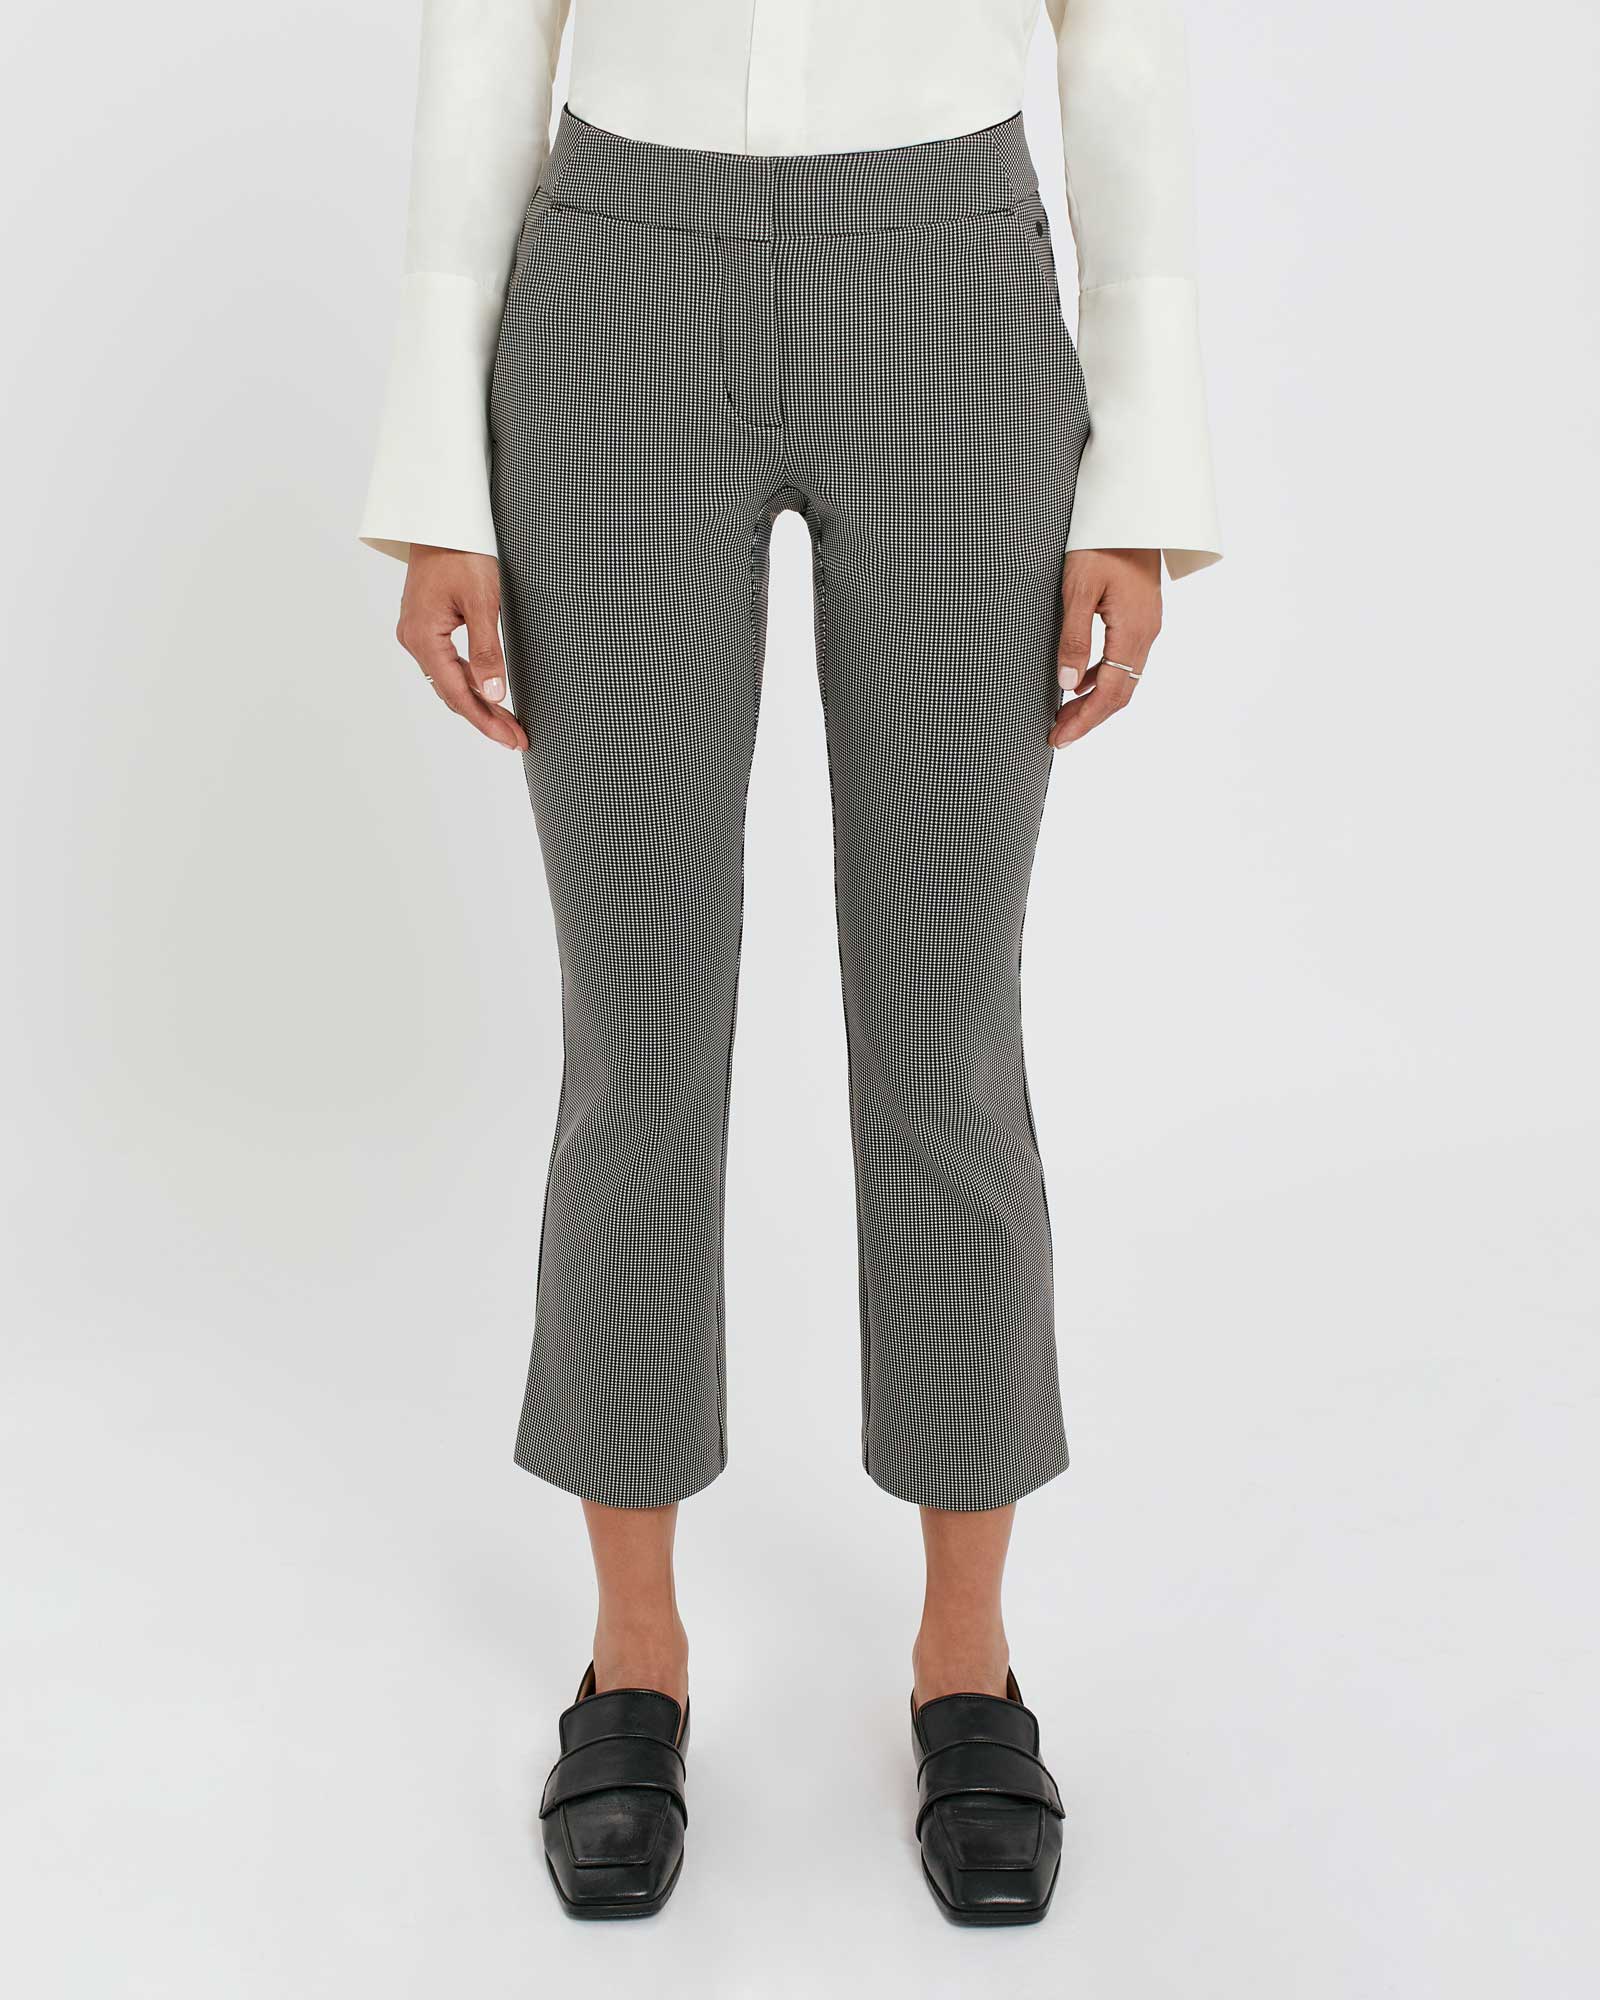 Flare Game Trousers Dogstooth 2.0 - Final Sale